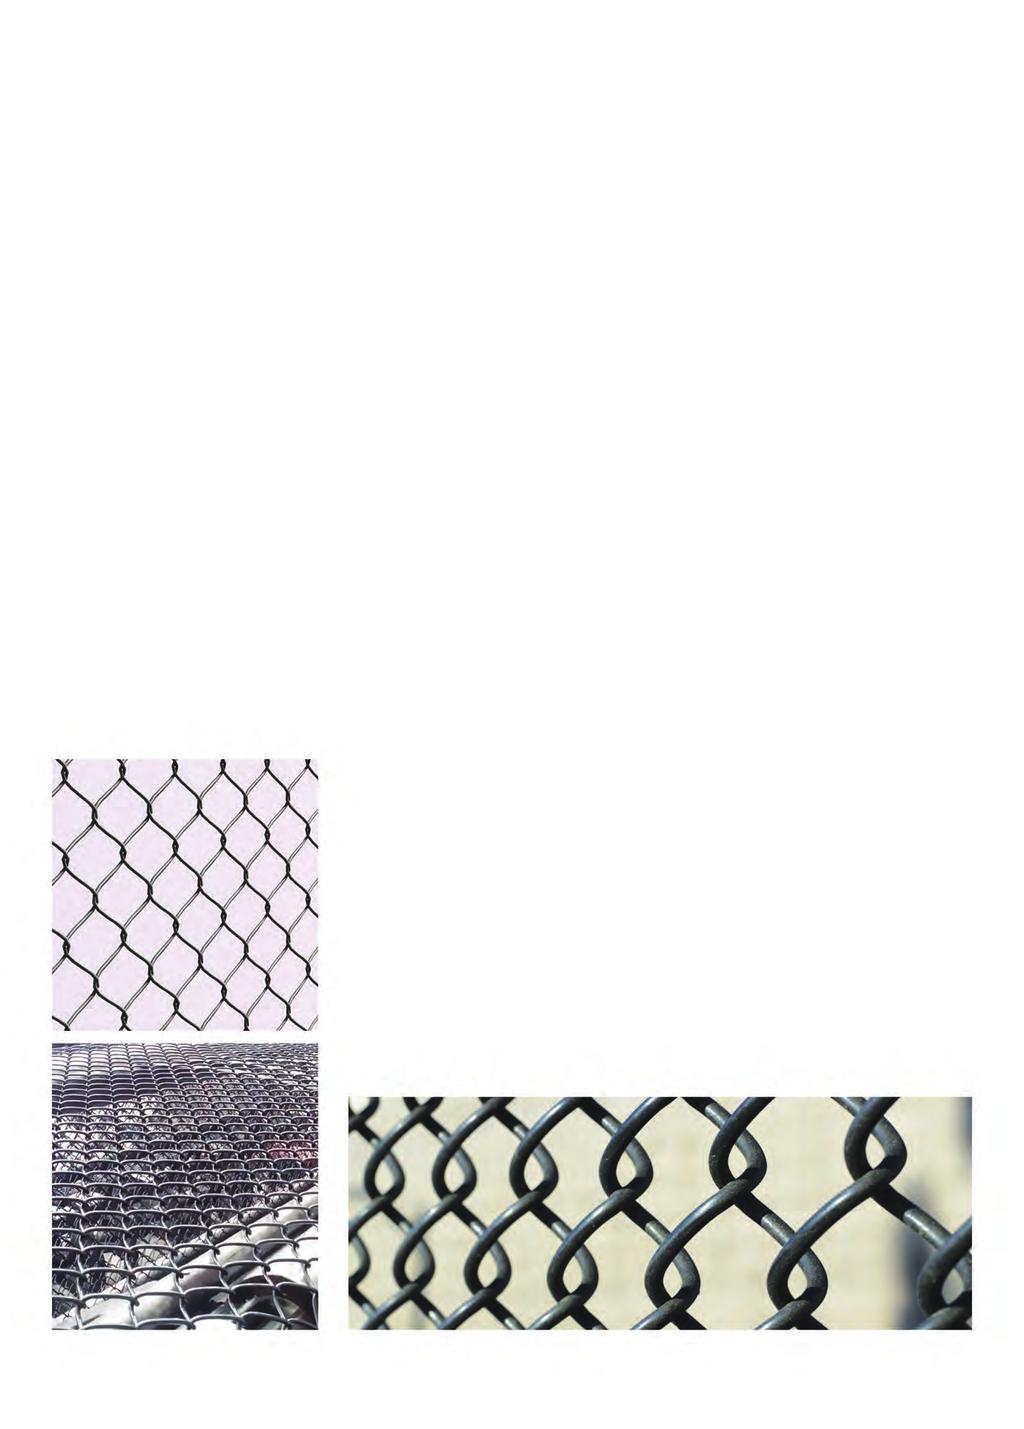 QATAR CHAIN LINK FENCING NETS TECHNICAL DATA SHEET Height (mm) Effective Height (mm) Opening Angle Standard Angle=85 Length (mm) AVAILABLE SIZES Thickness 2 mm 3 mm 2 mm 3 mm 2 mm 3 mm Length of Roll